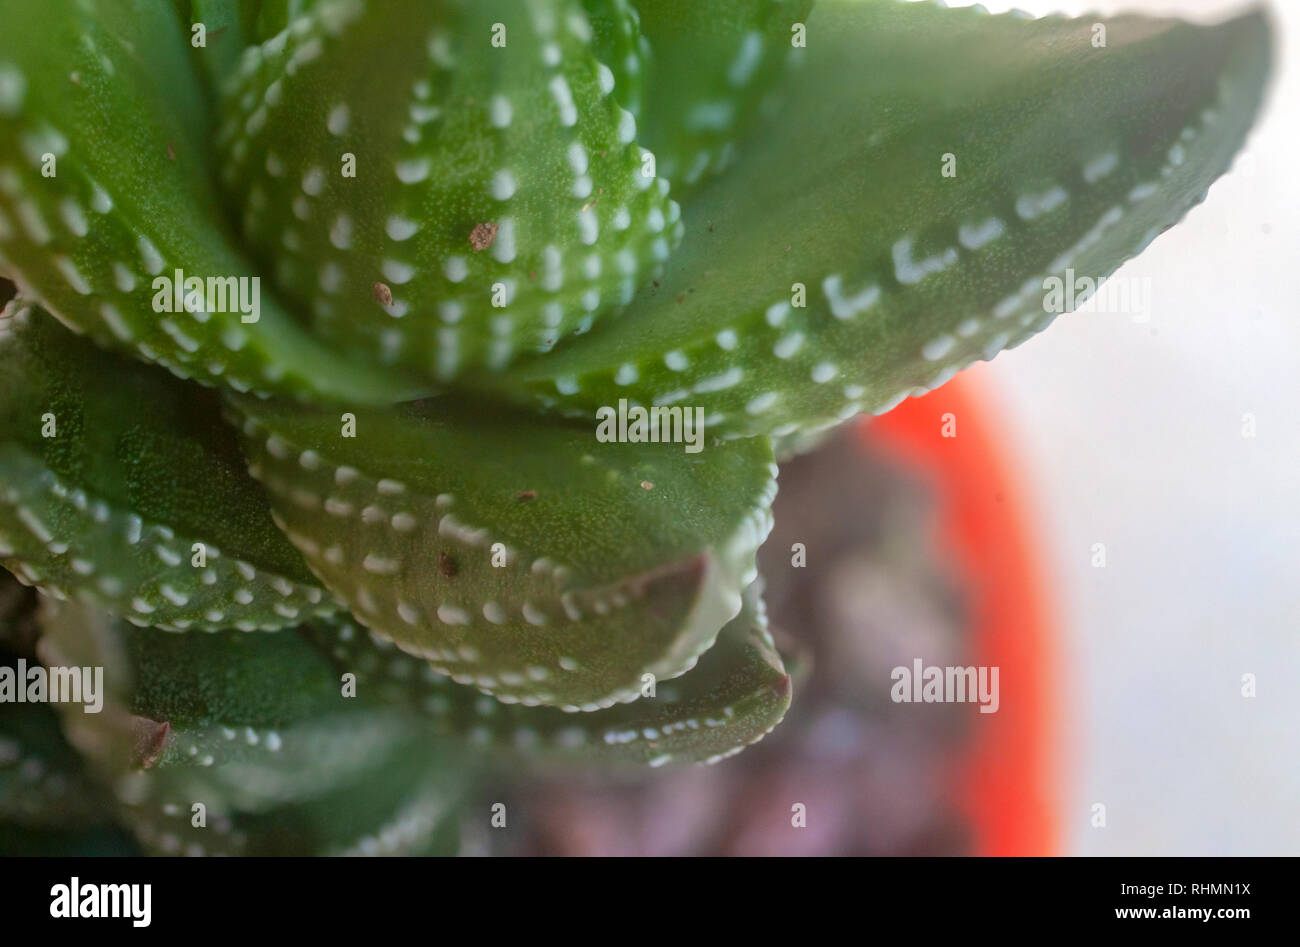 Haworthia reinwardtii (Zebra Wart), showing its rosette of succulent and stiff leaves with thorns. Stock Photo